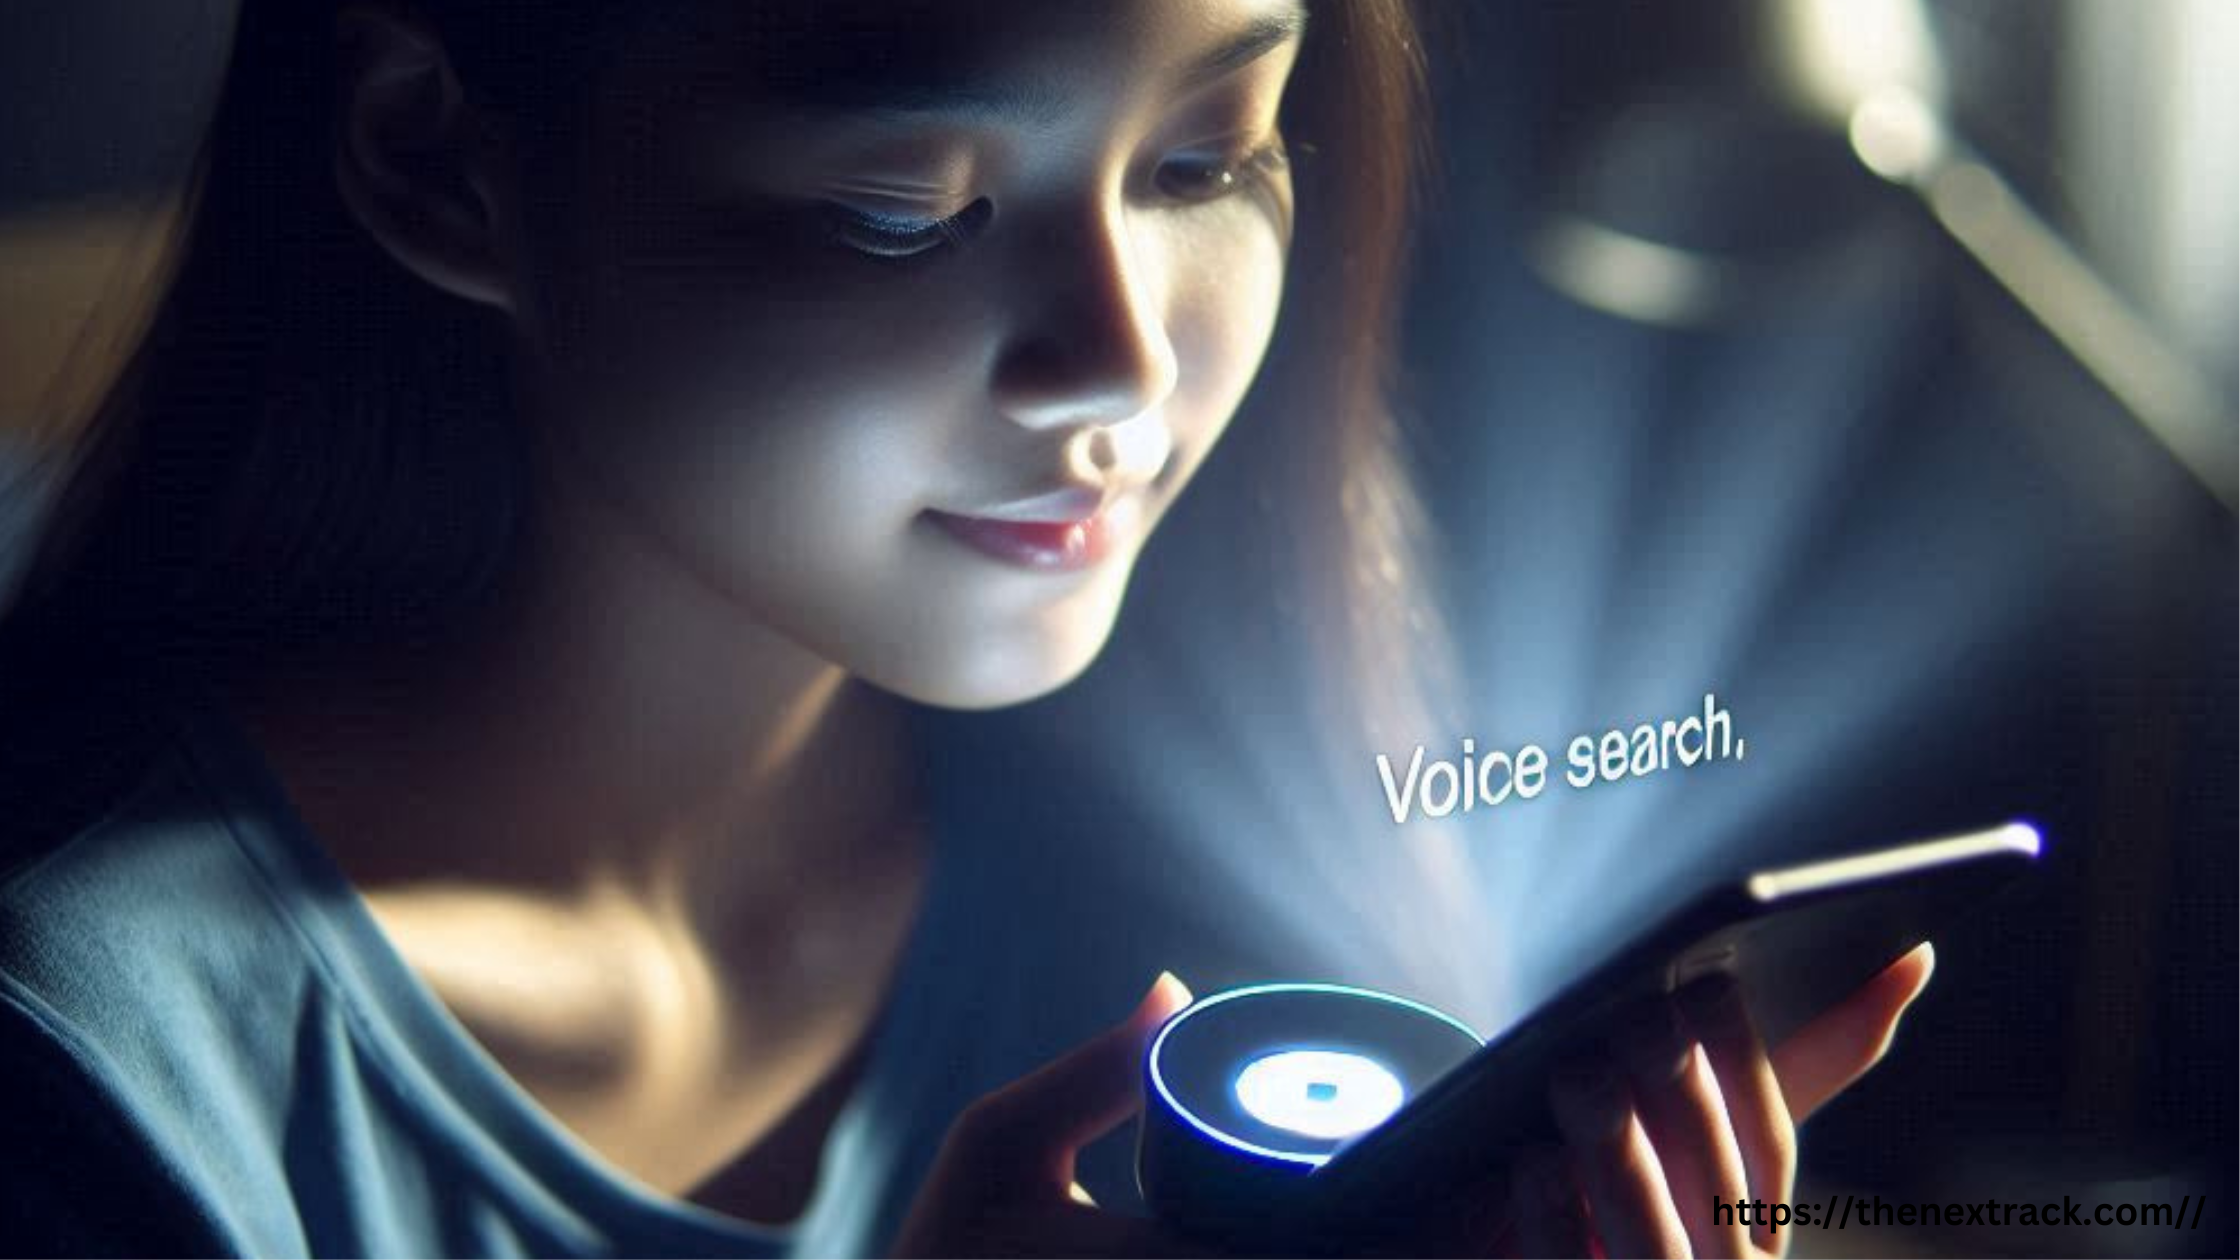 Seo strategies for voice search optimization